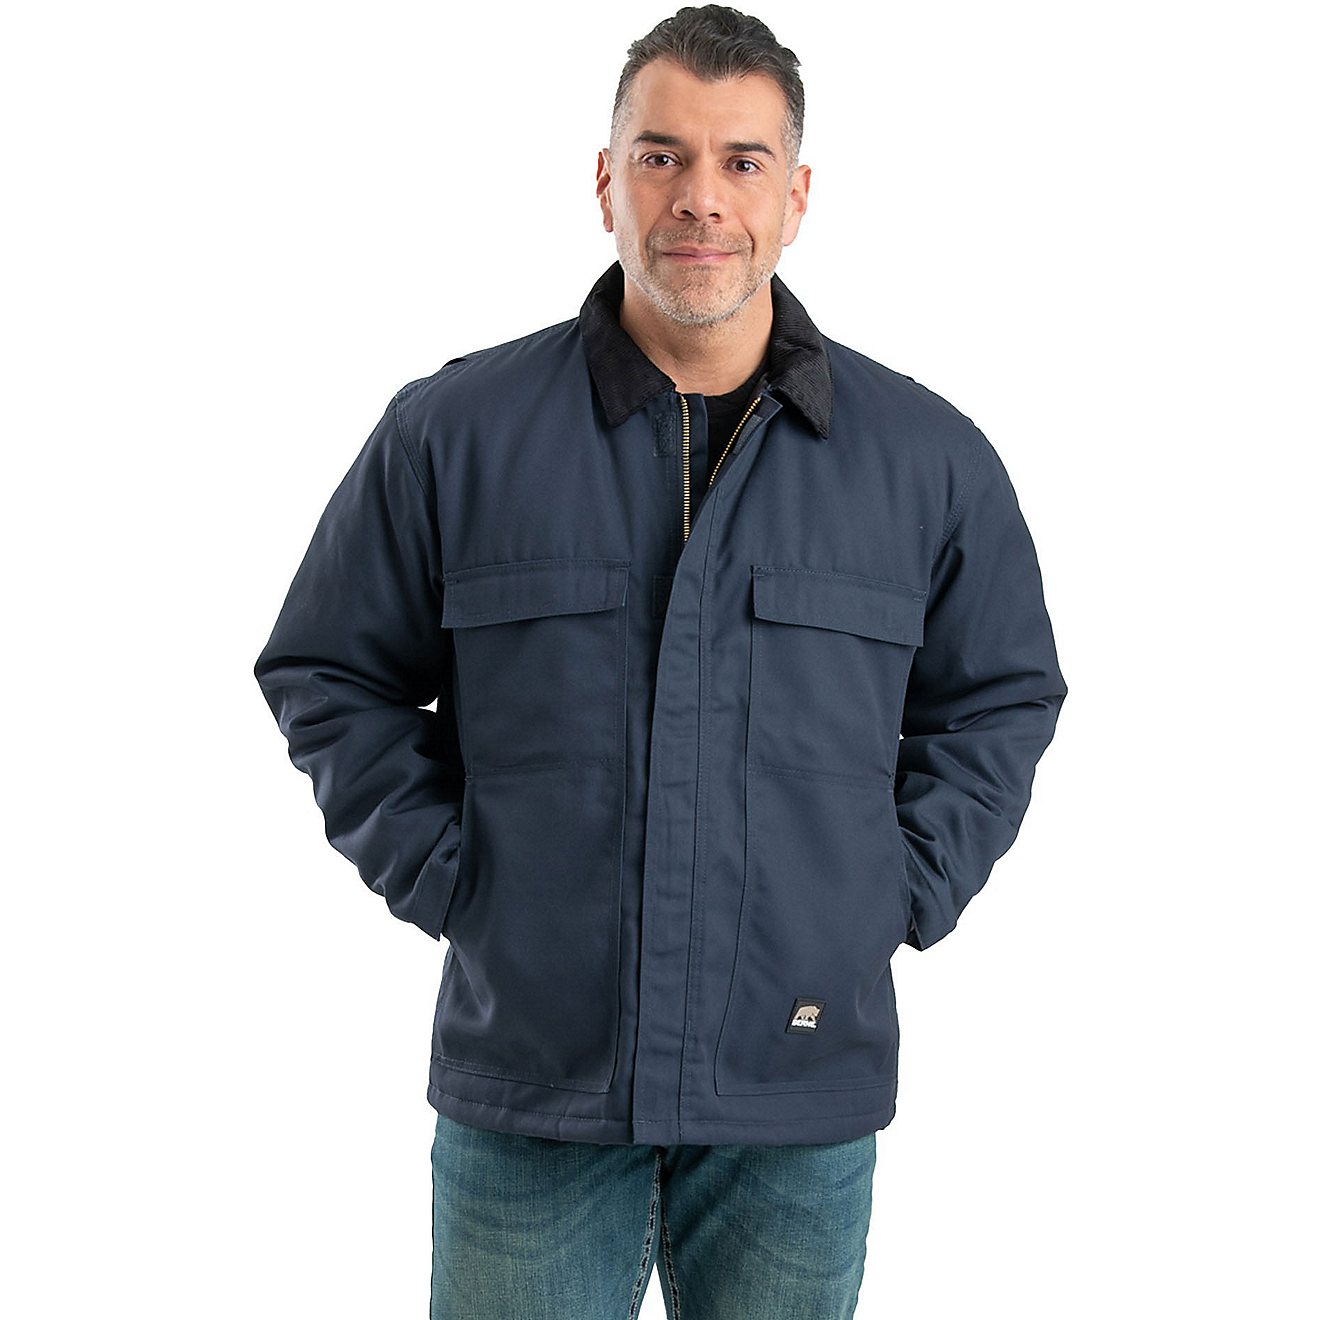 Berne Men's Heritage Twill Chore Coat | Free Shipping at Academy